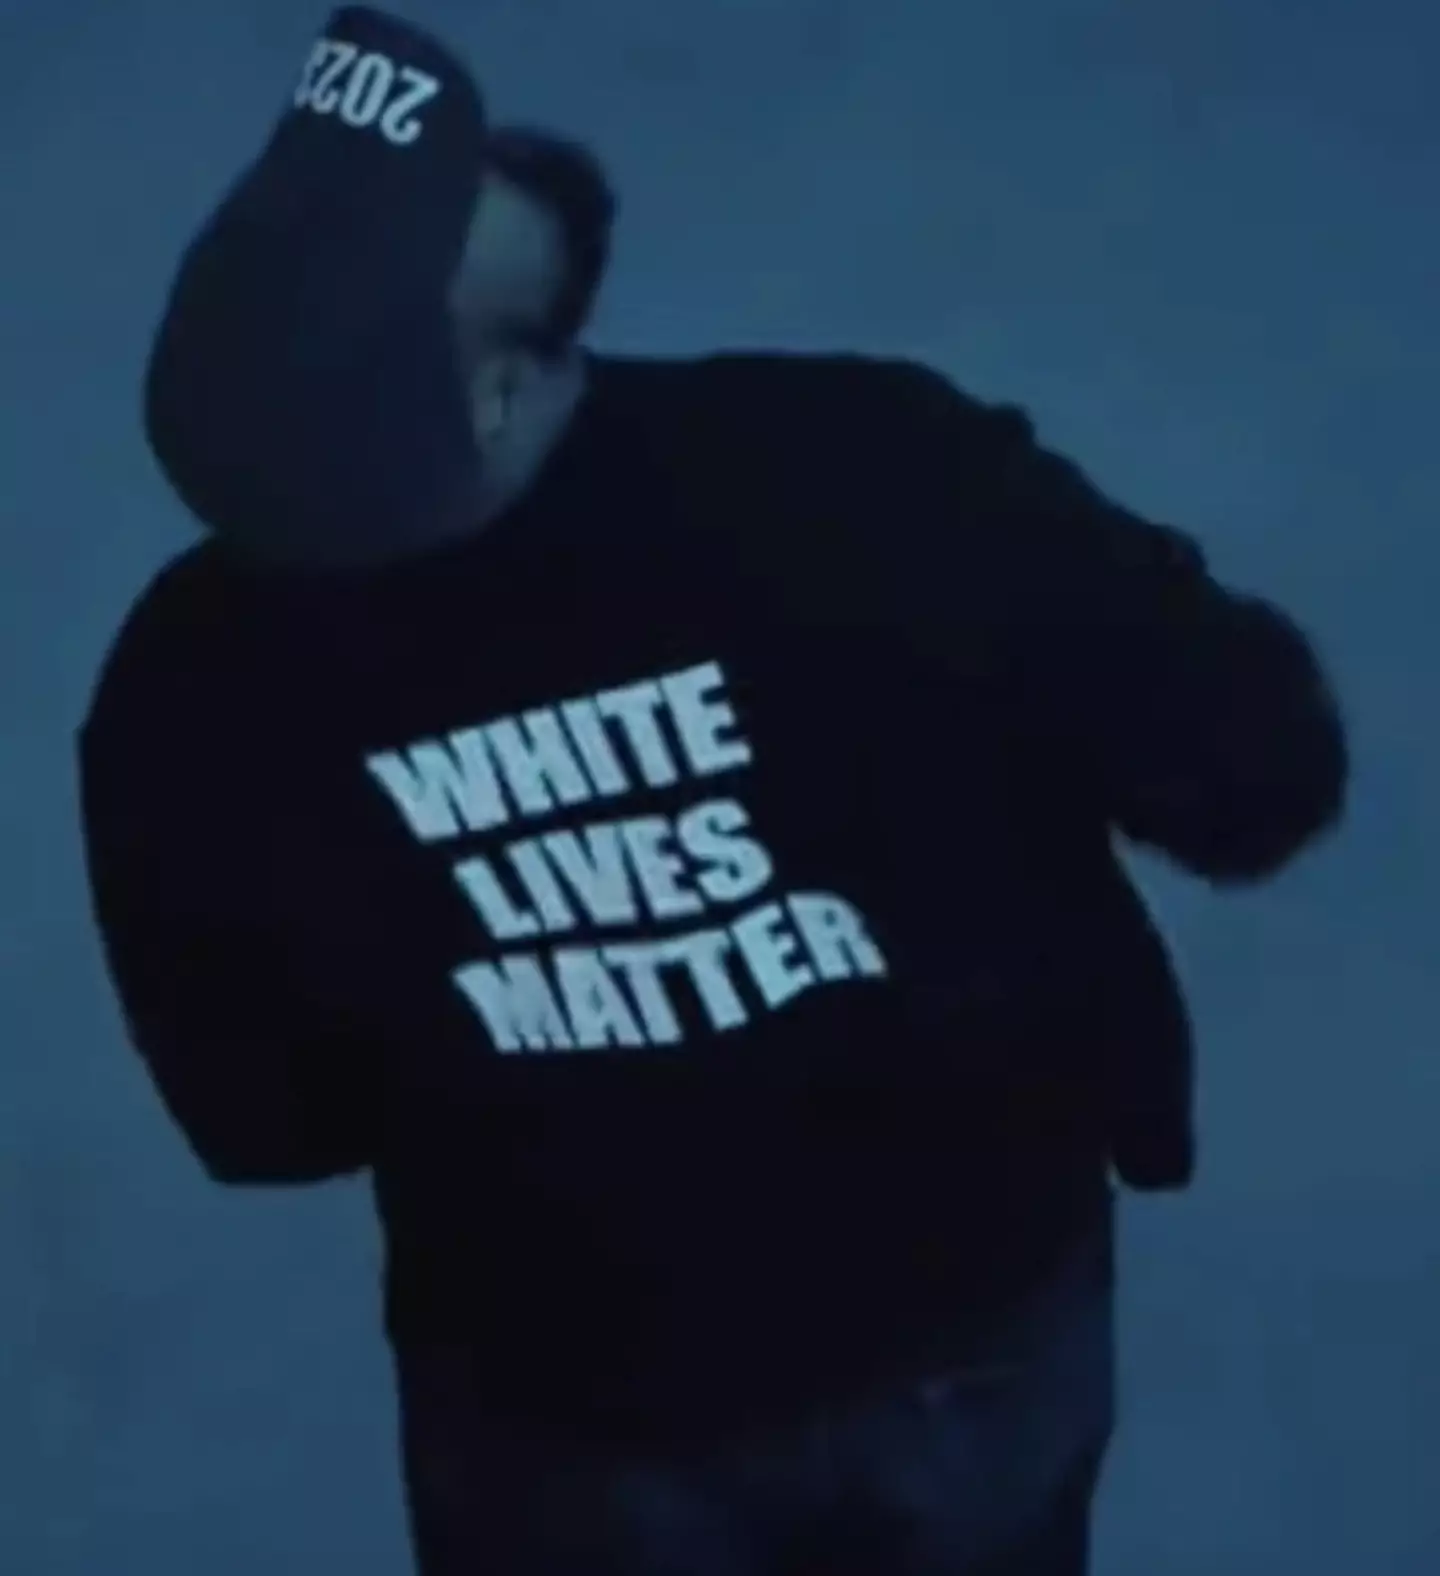 The rapper was heavily criticised for wearing a 'White Lives Matter' t-shirt.